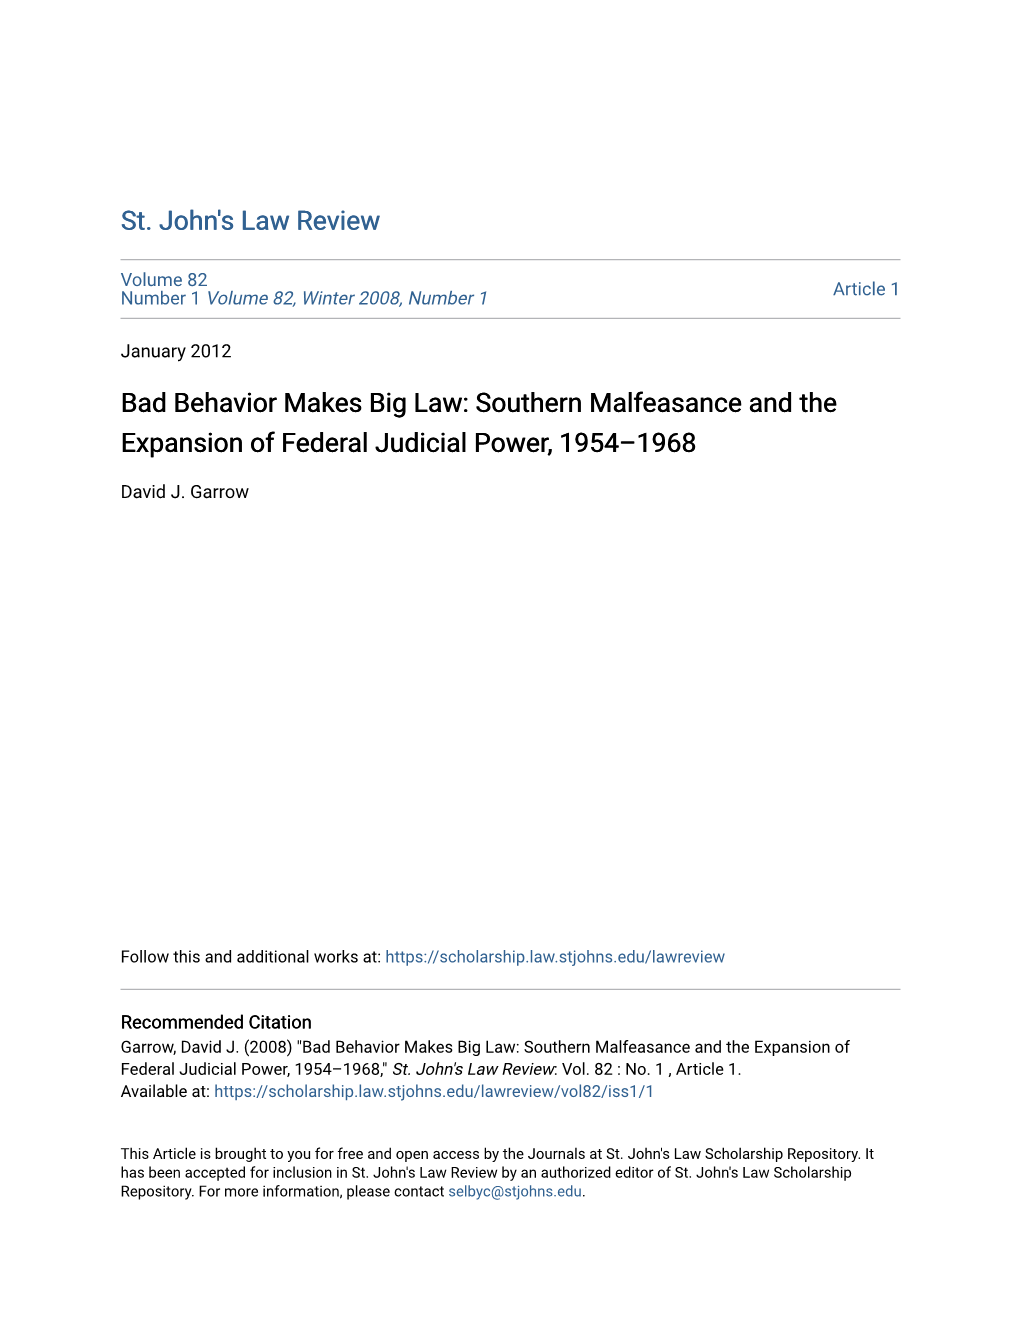 Bad Behavior Makes Big Law: Southern Malfeasance and the Expansion of Federal Judicial Power, 1954Â•Fi1968